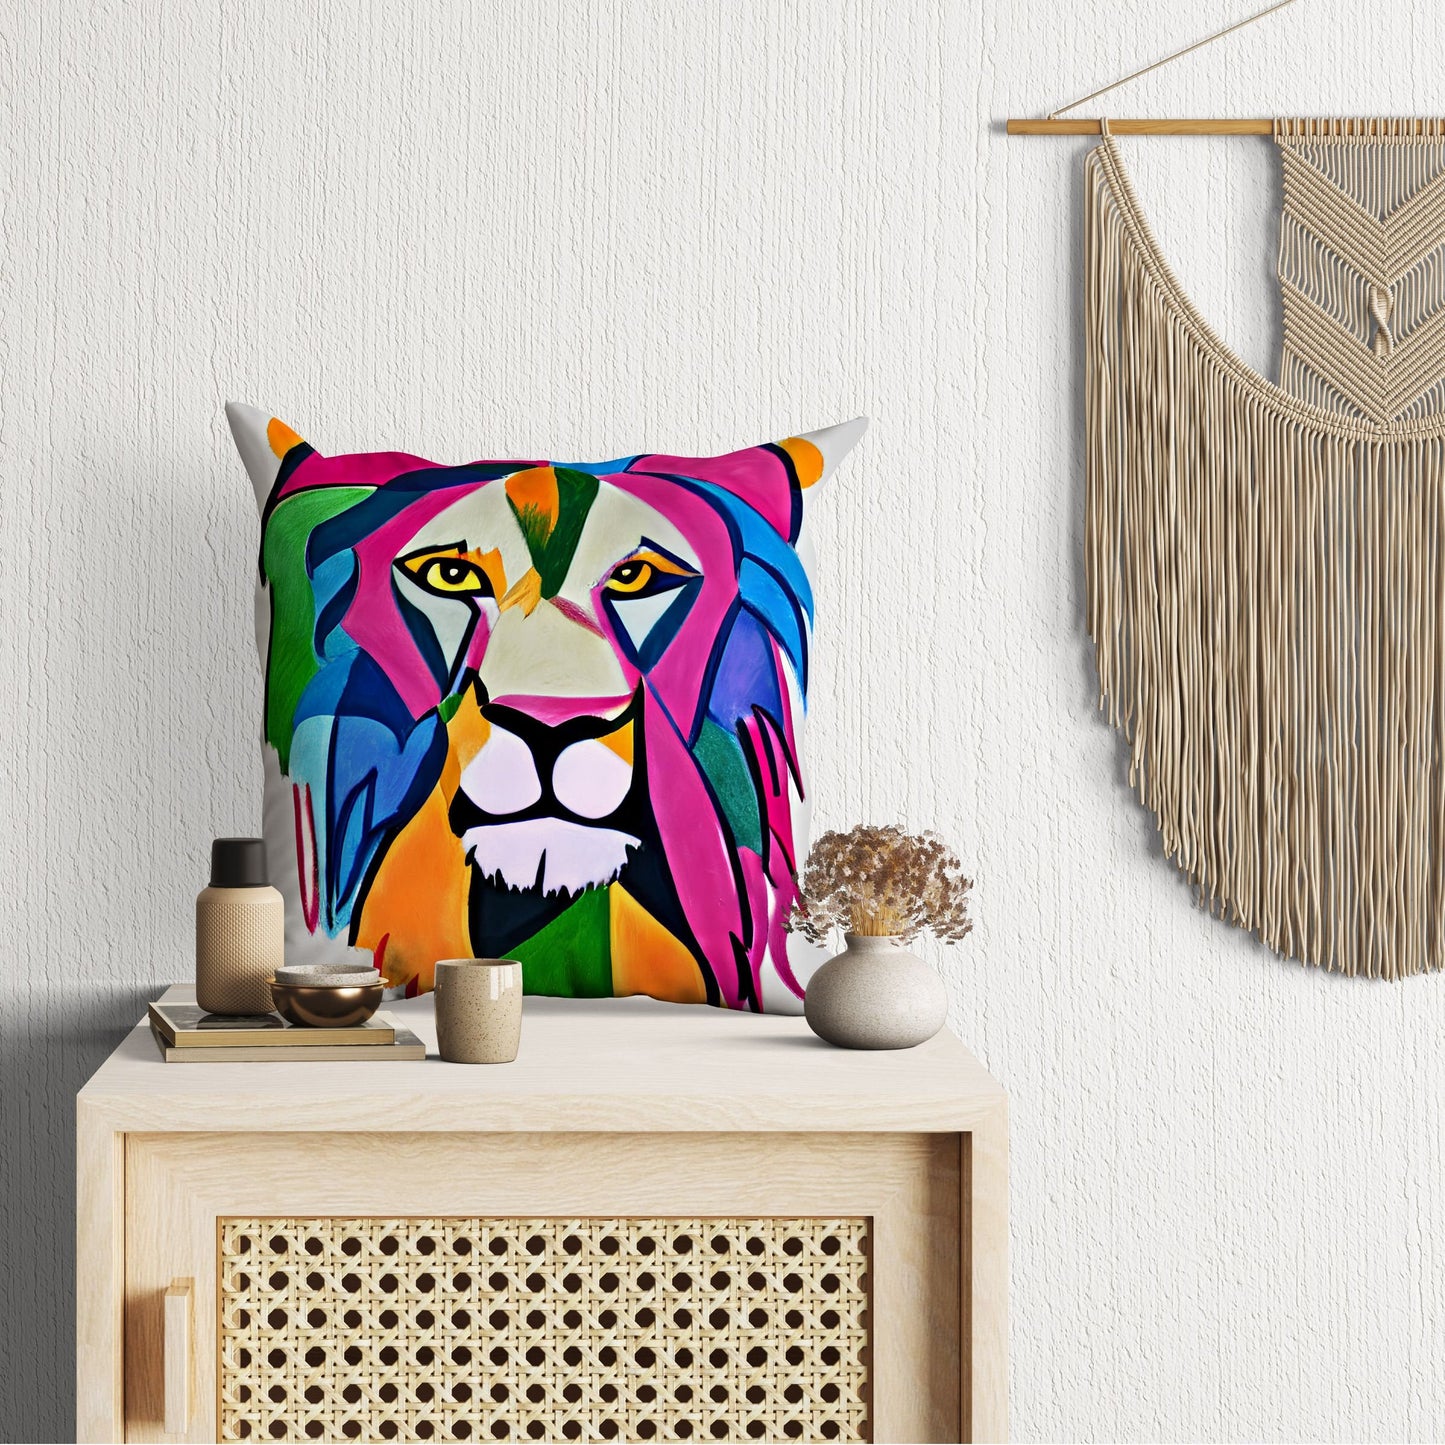 Original Art African Wildlife Lion King Decorative Pillow, Abstract Throw Pillow Cover, Soft Pillow Cases, Colorful Pillow Case, Fashion